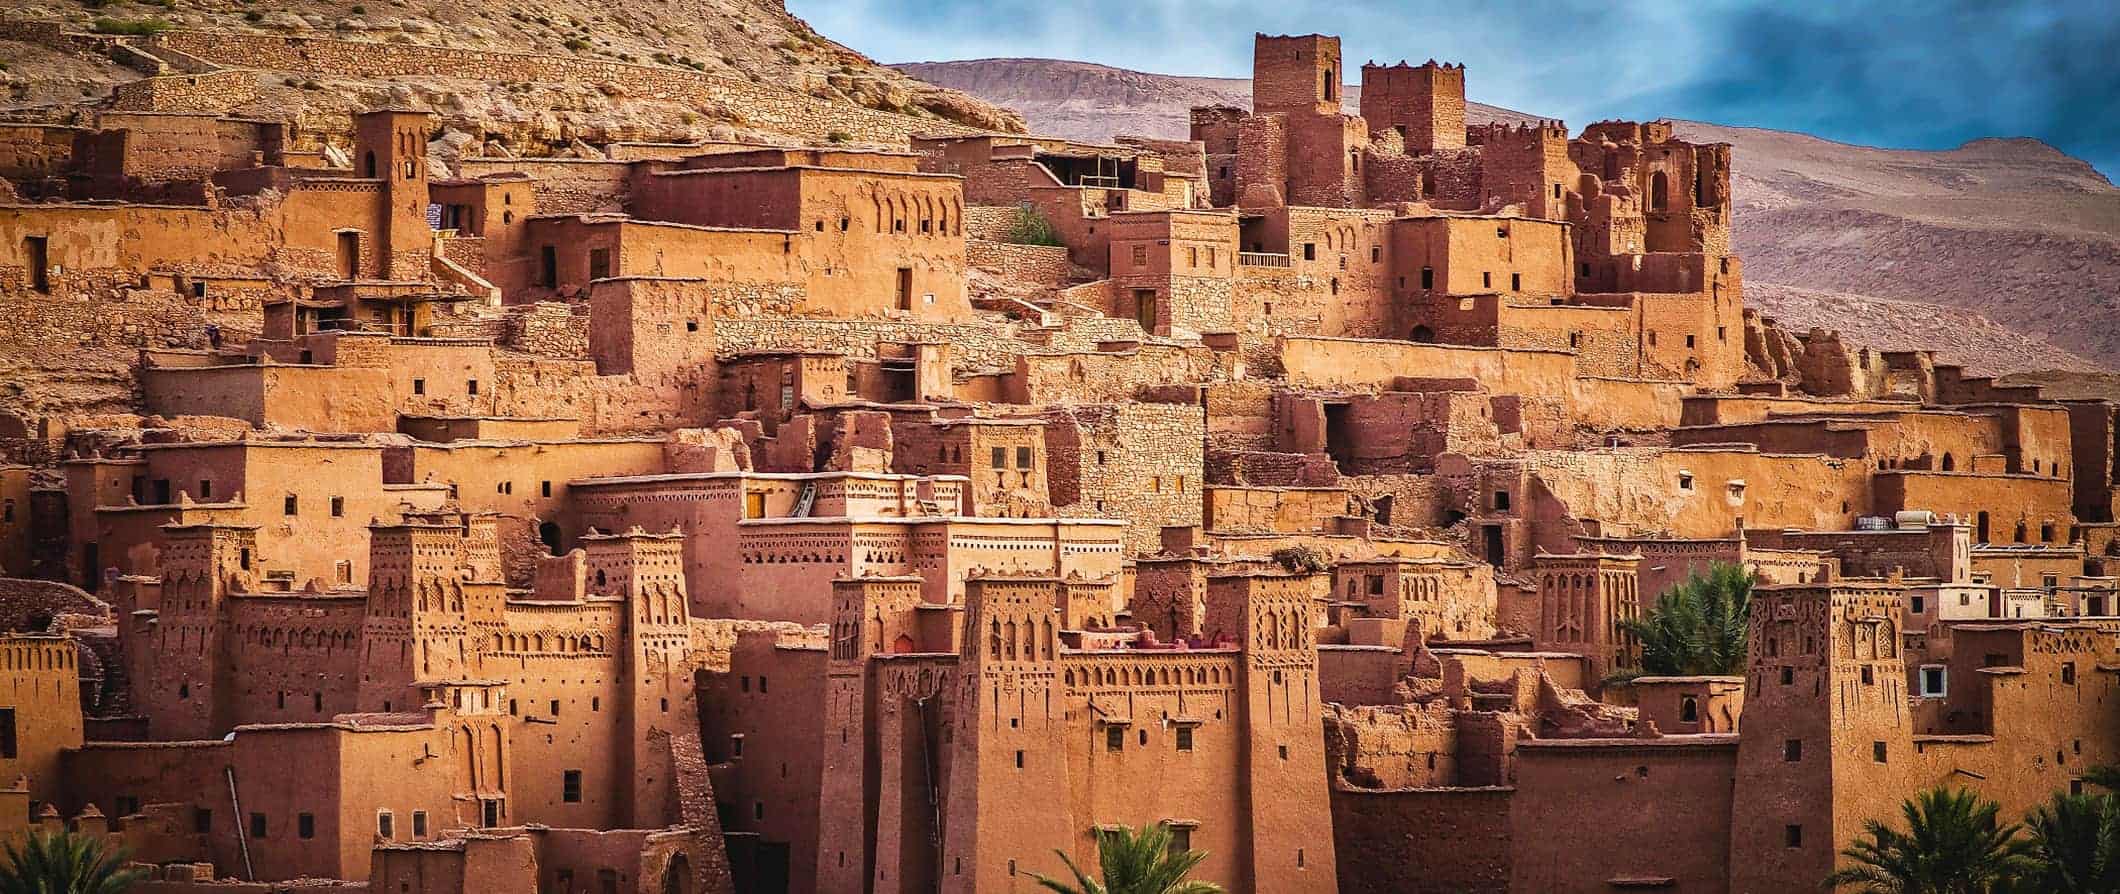 Traditional sandstone buildings along the ridge of a slope in beautiful Morocco